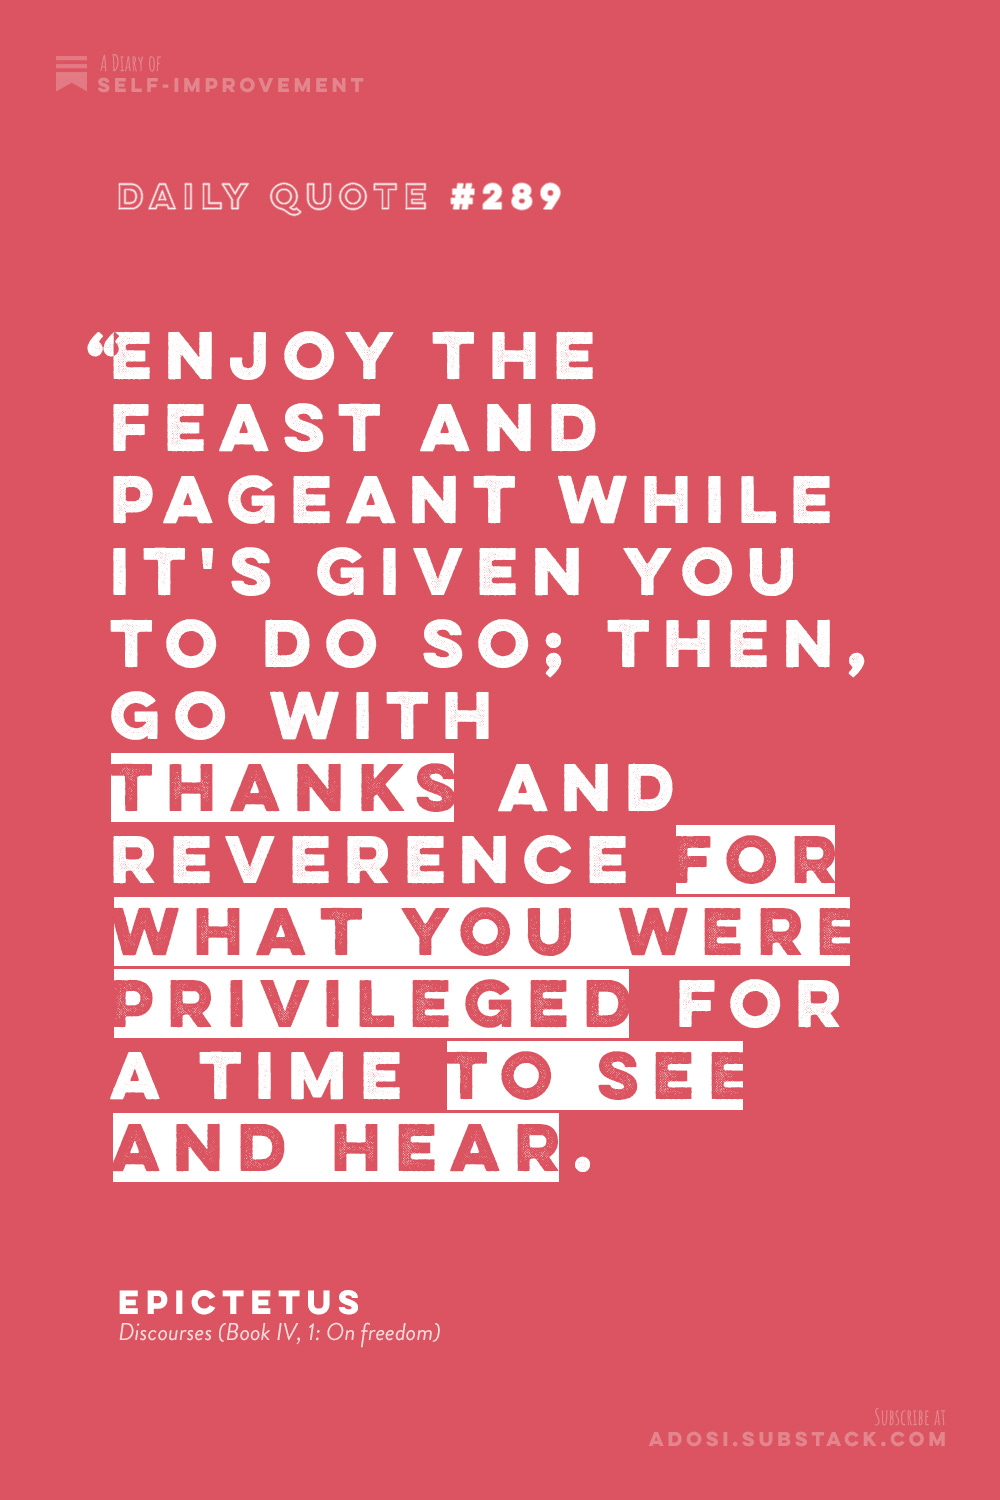 Daily Quote #289: "Enjoy the feast and pageant while it's given you to do so; then, go with thanks and reverence for what you were privileged for a time to see and hear." Epictetus, Discourses (Book IV, 1: On freedom)